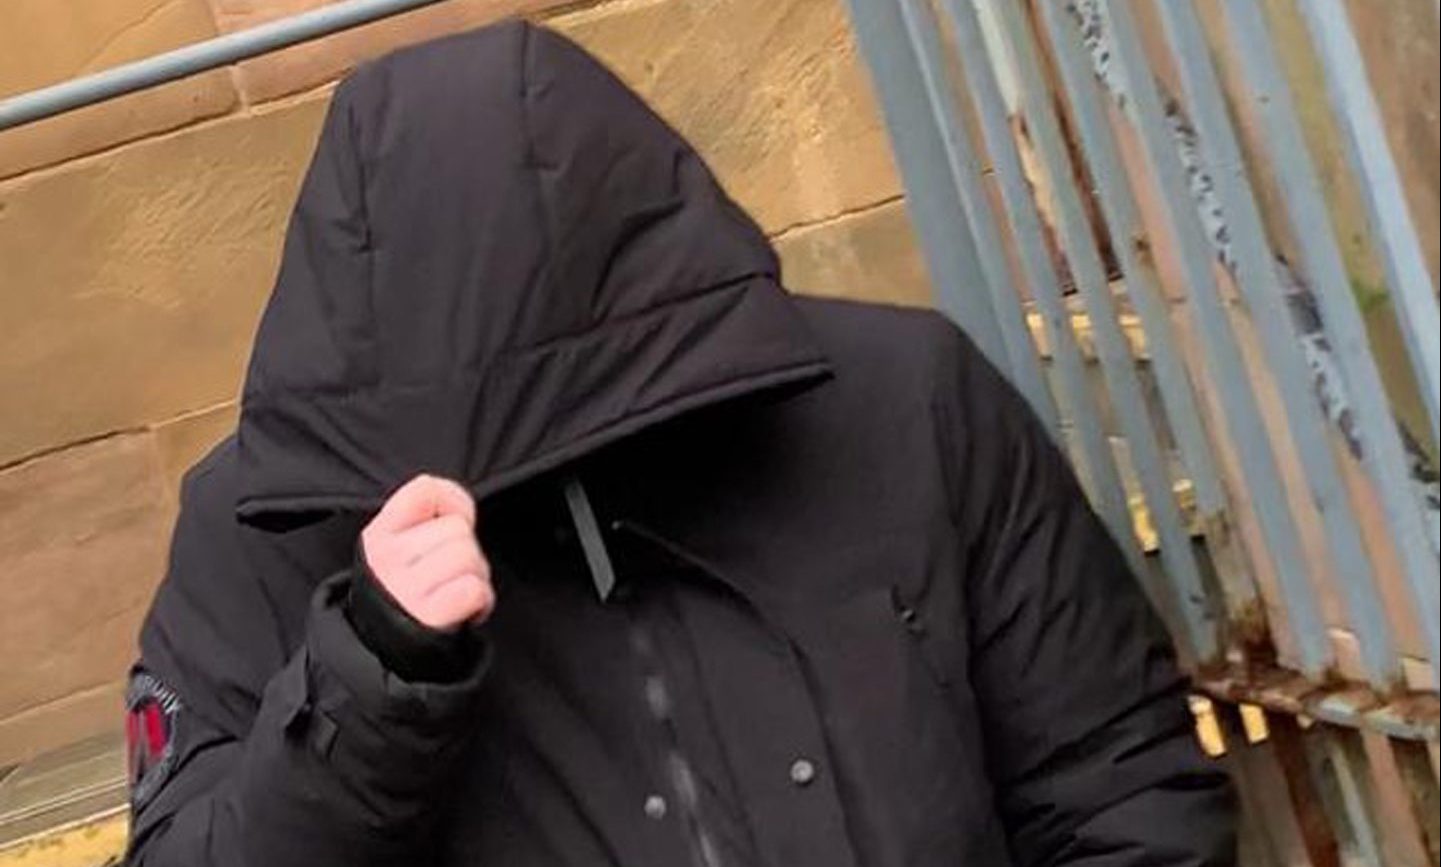 Callum Phillips hid his face as he left court. He will return for sentencing next month.